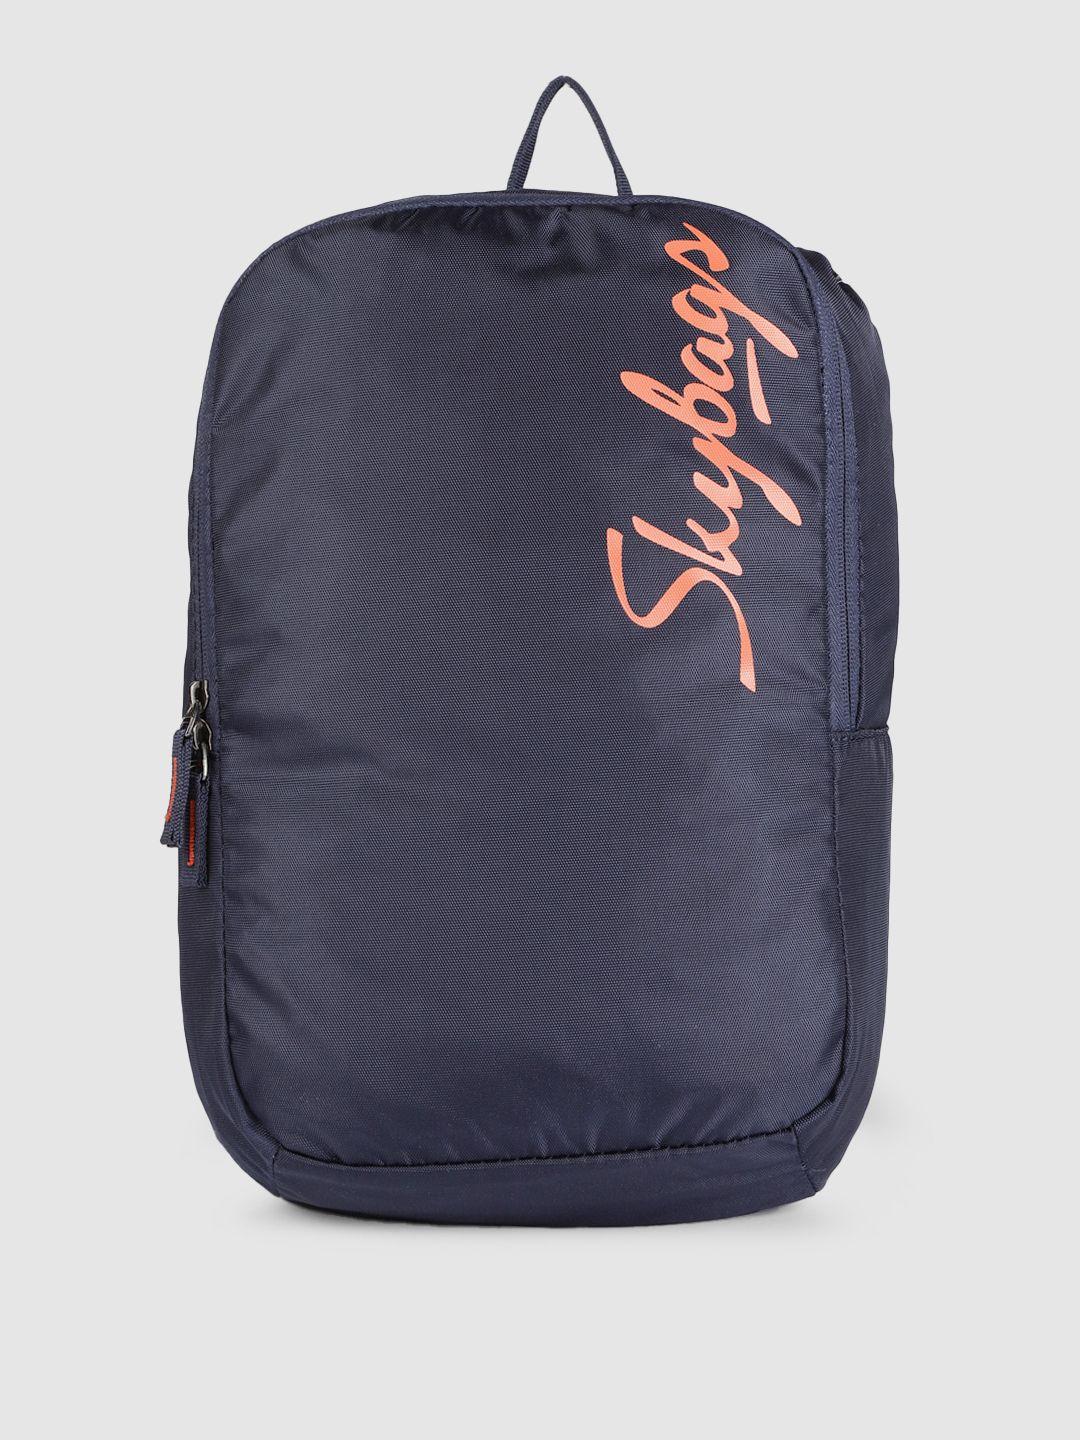 skybags unisex navy blue brand logo backpack